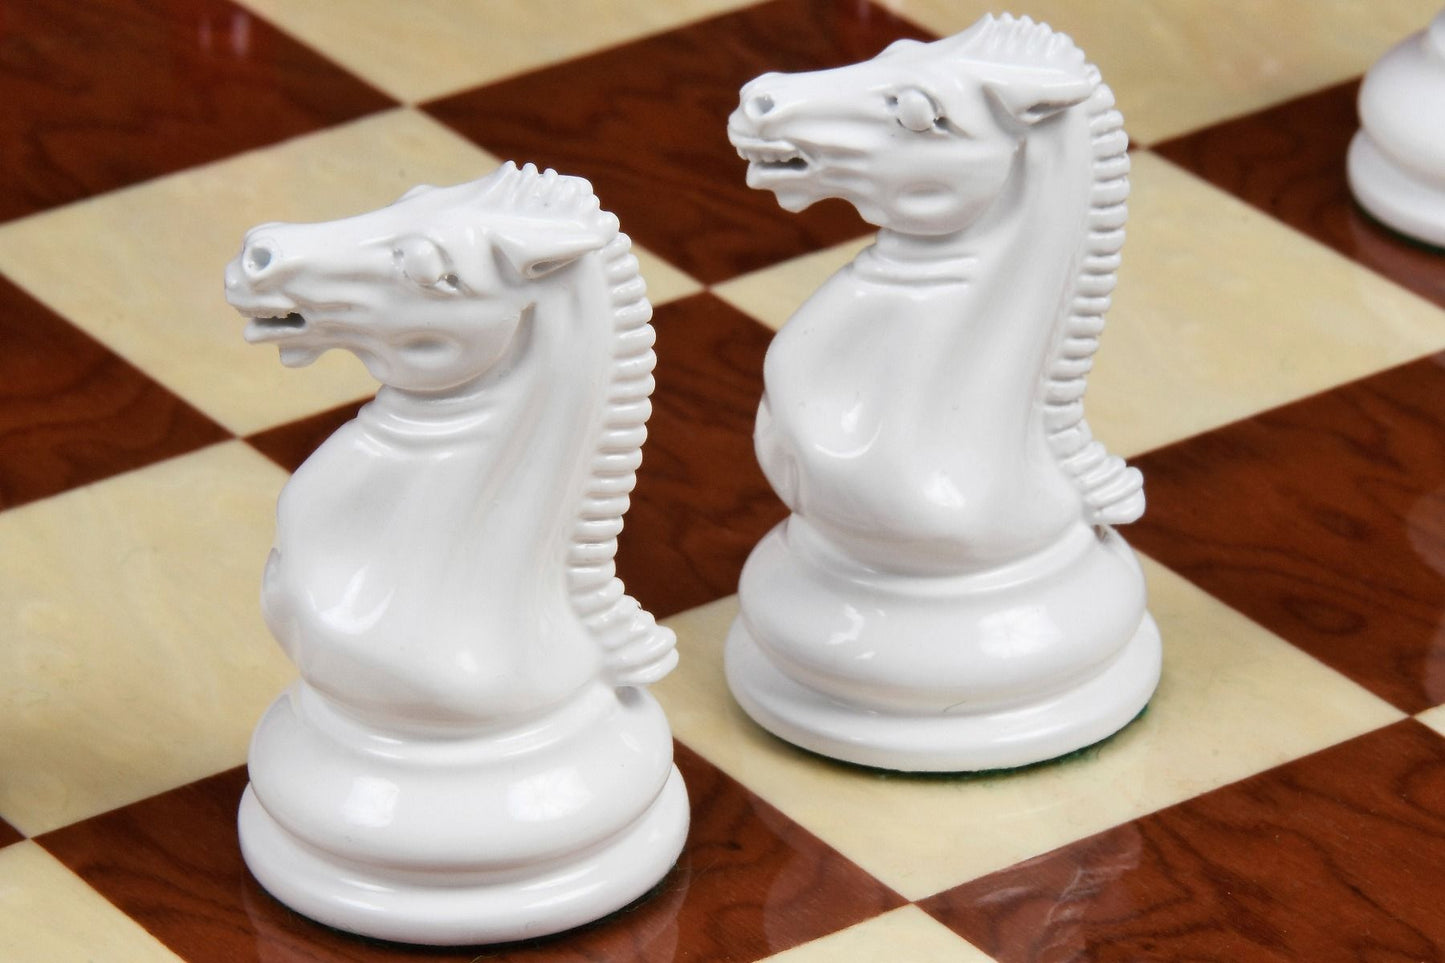 Combo of Reproduced 1849 Original Staunton Pattern Chess Pieces in Lacquer Finished Painted Crimson & Ivory White - 4.5" King with Red Ash Burl Maple Hi Gloss Finish Chess Board - 19"